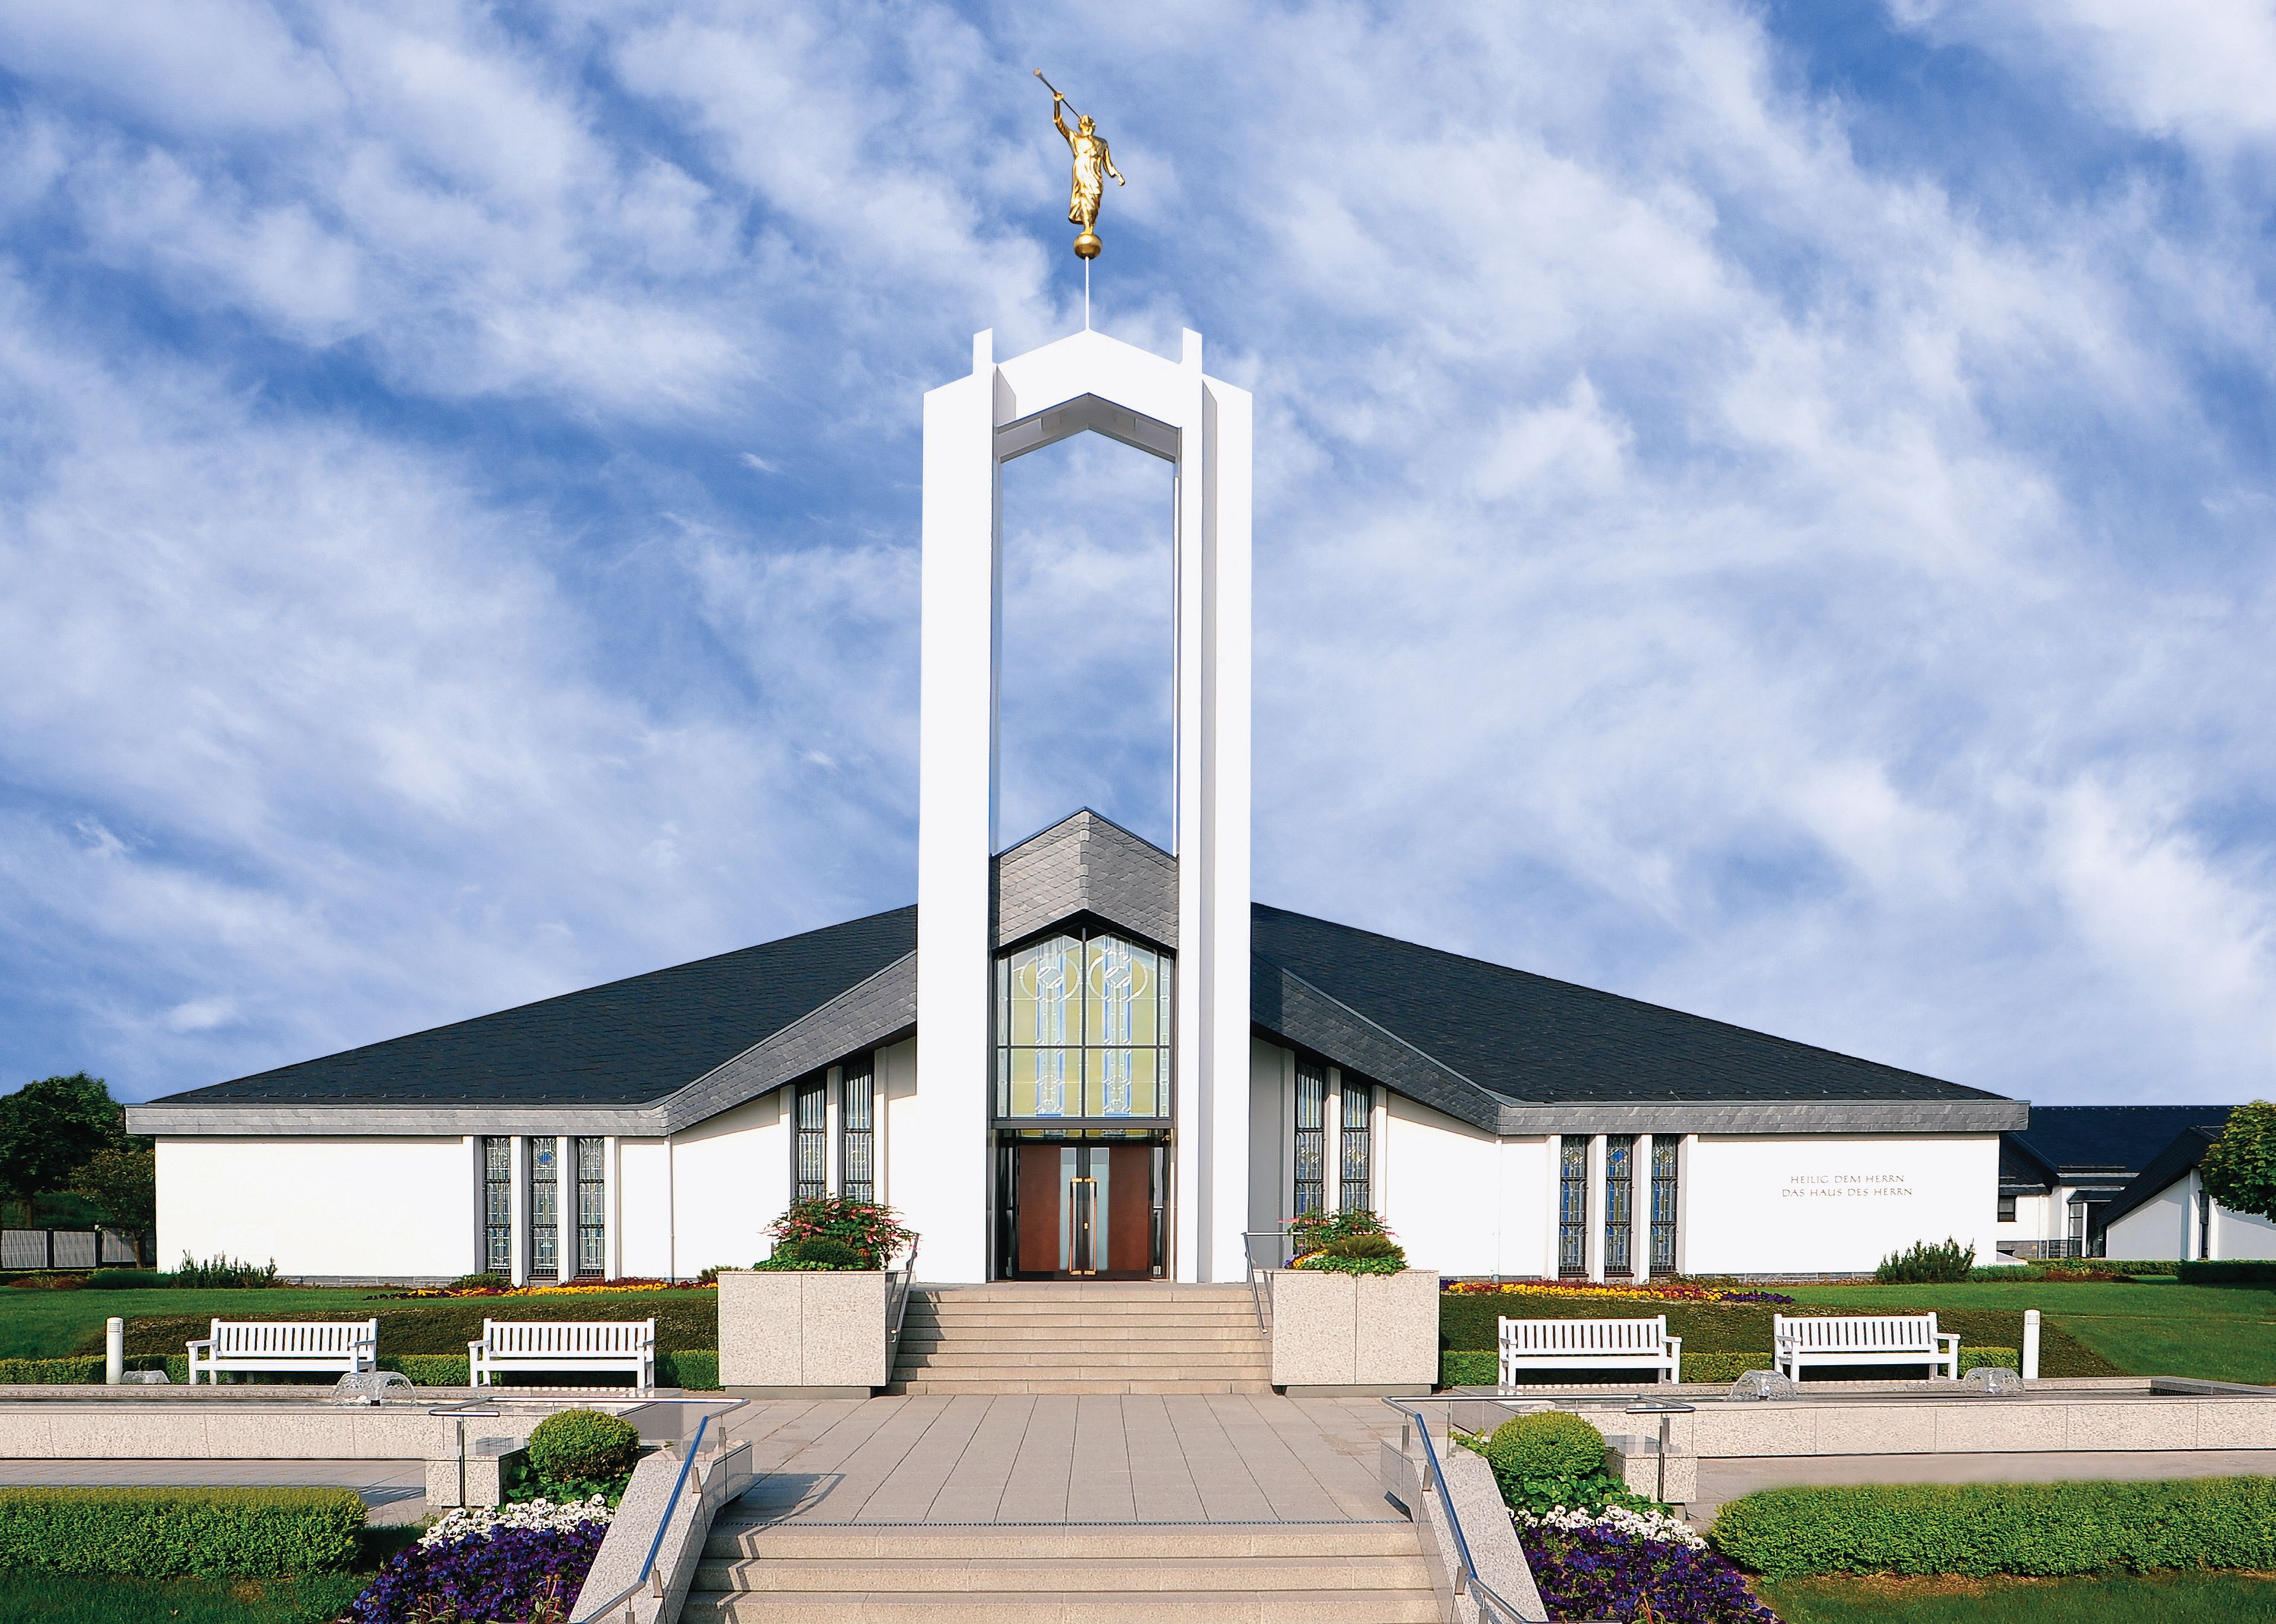 An exterior view of the front of the Freiberg Germany Temple.